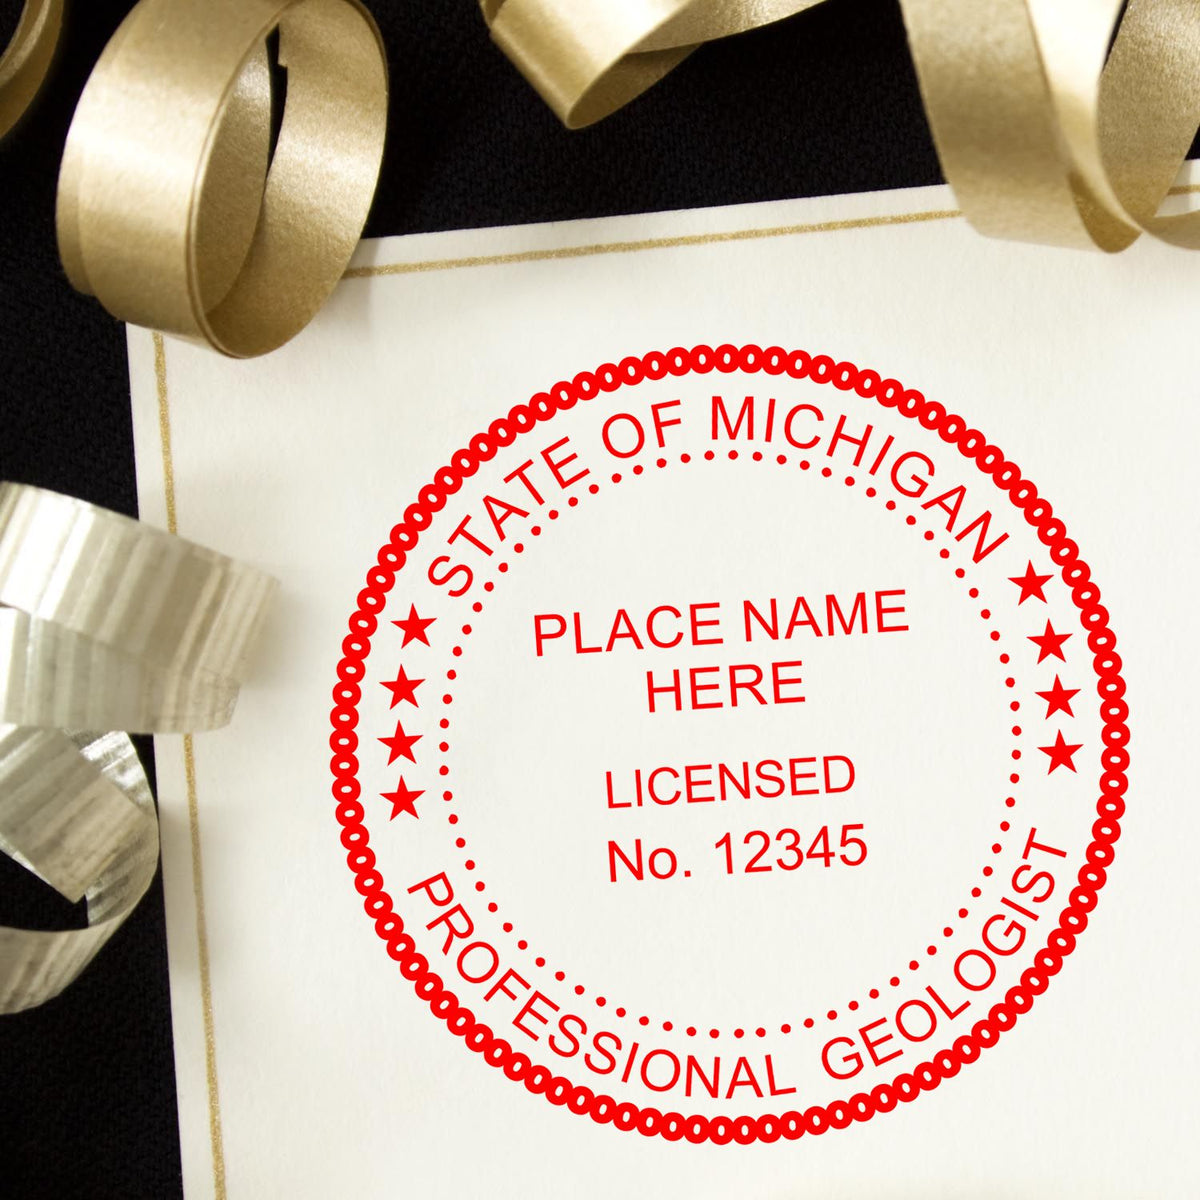 A lifestyle photo showing a stamped image of the Michigan Professional Geologist Seal Stamp on a piece of paper